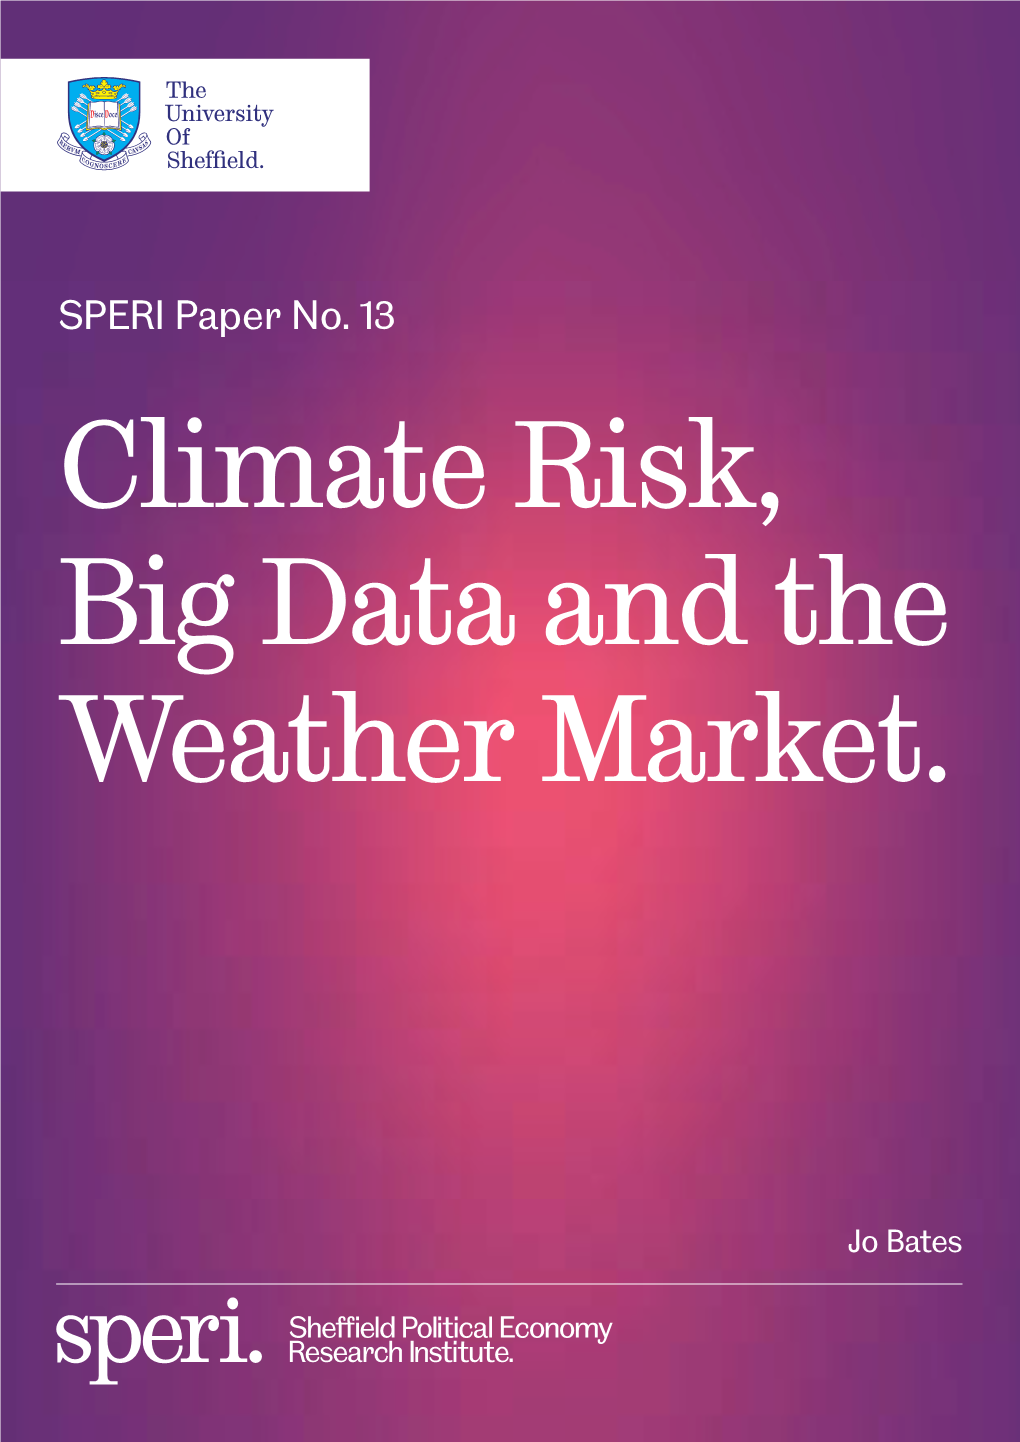 SPERI Paper No. 13 Climate Risk, Big Data and the Weather Market